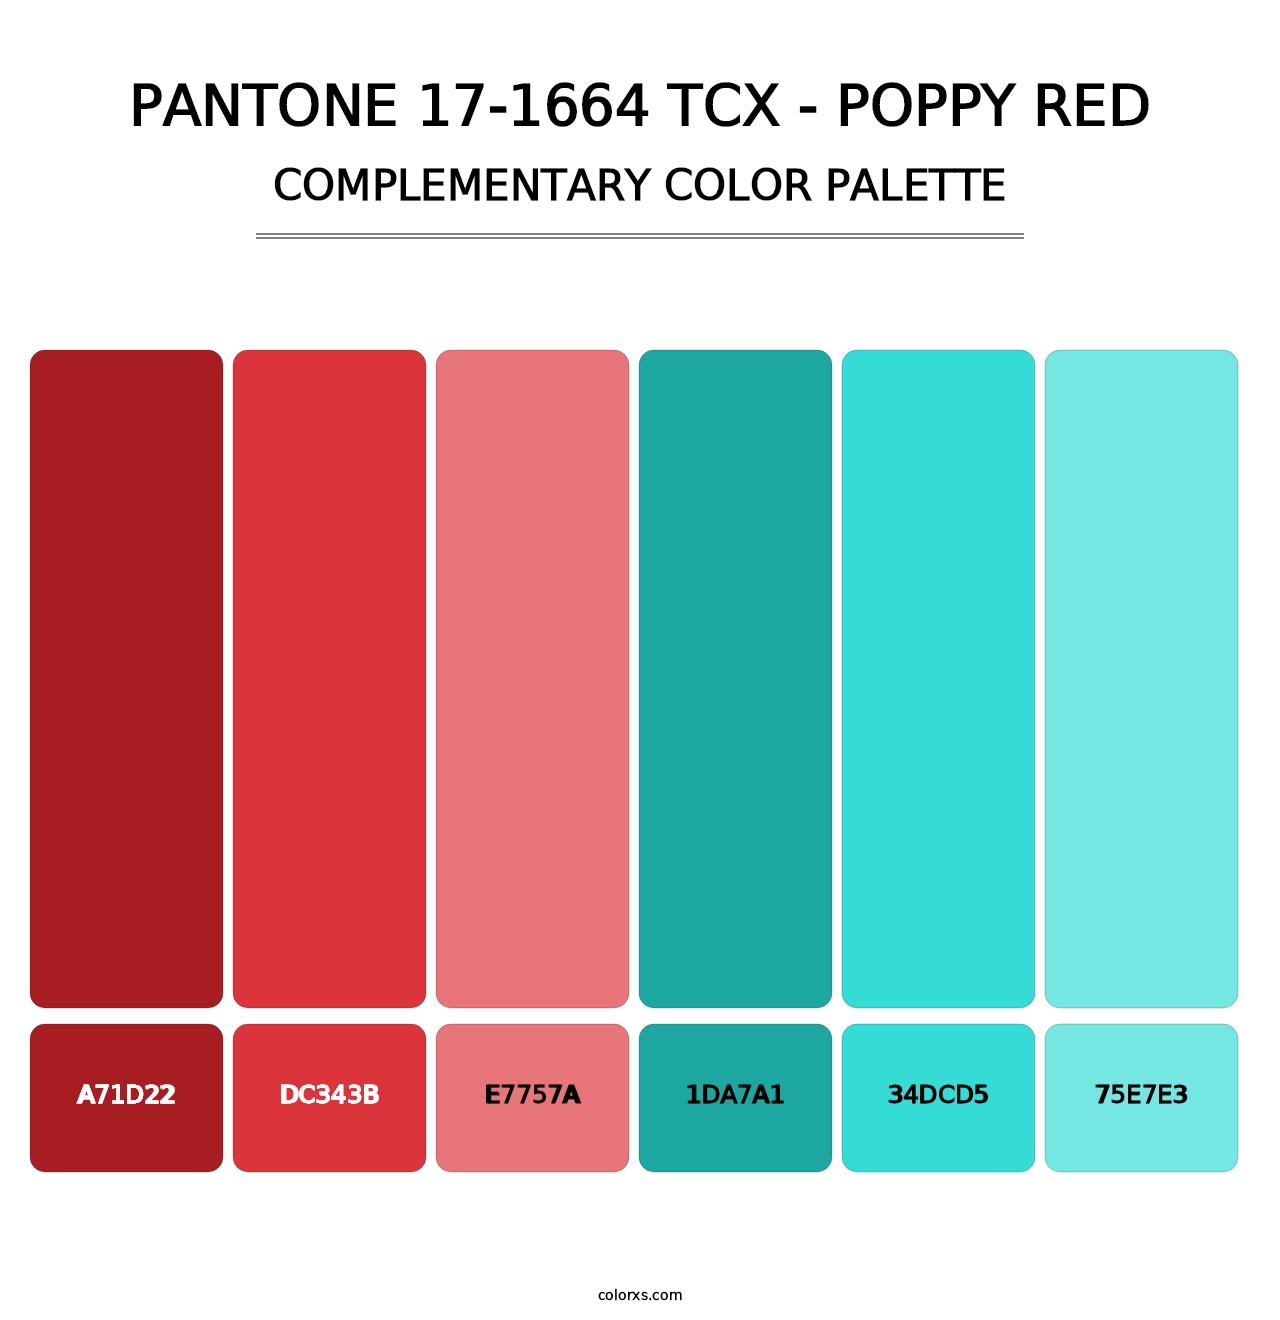 PANTONE 17-1664 TCX - Poppy Red - Complementary Color Palette